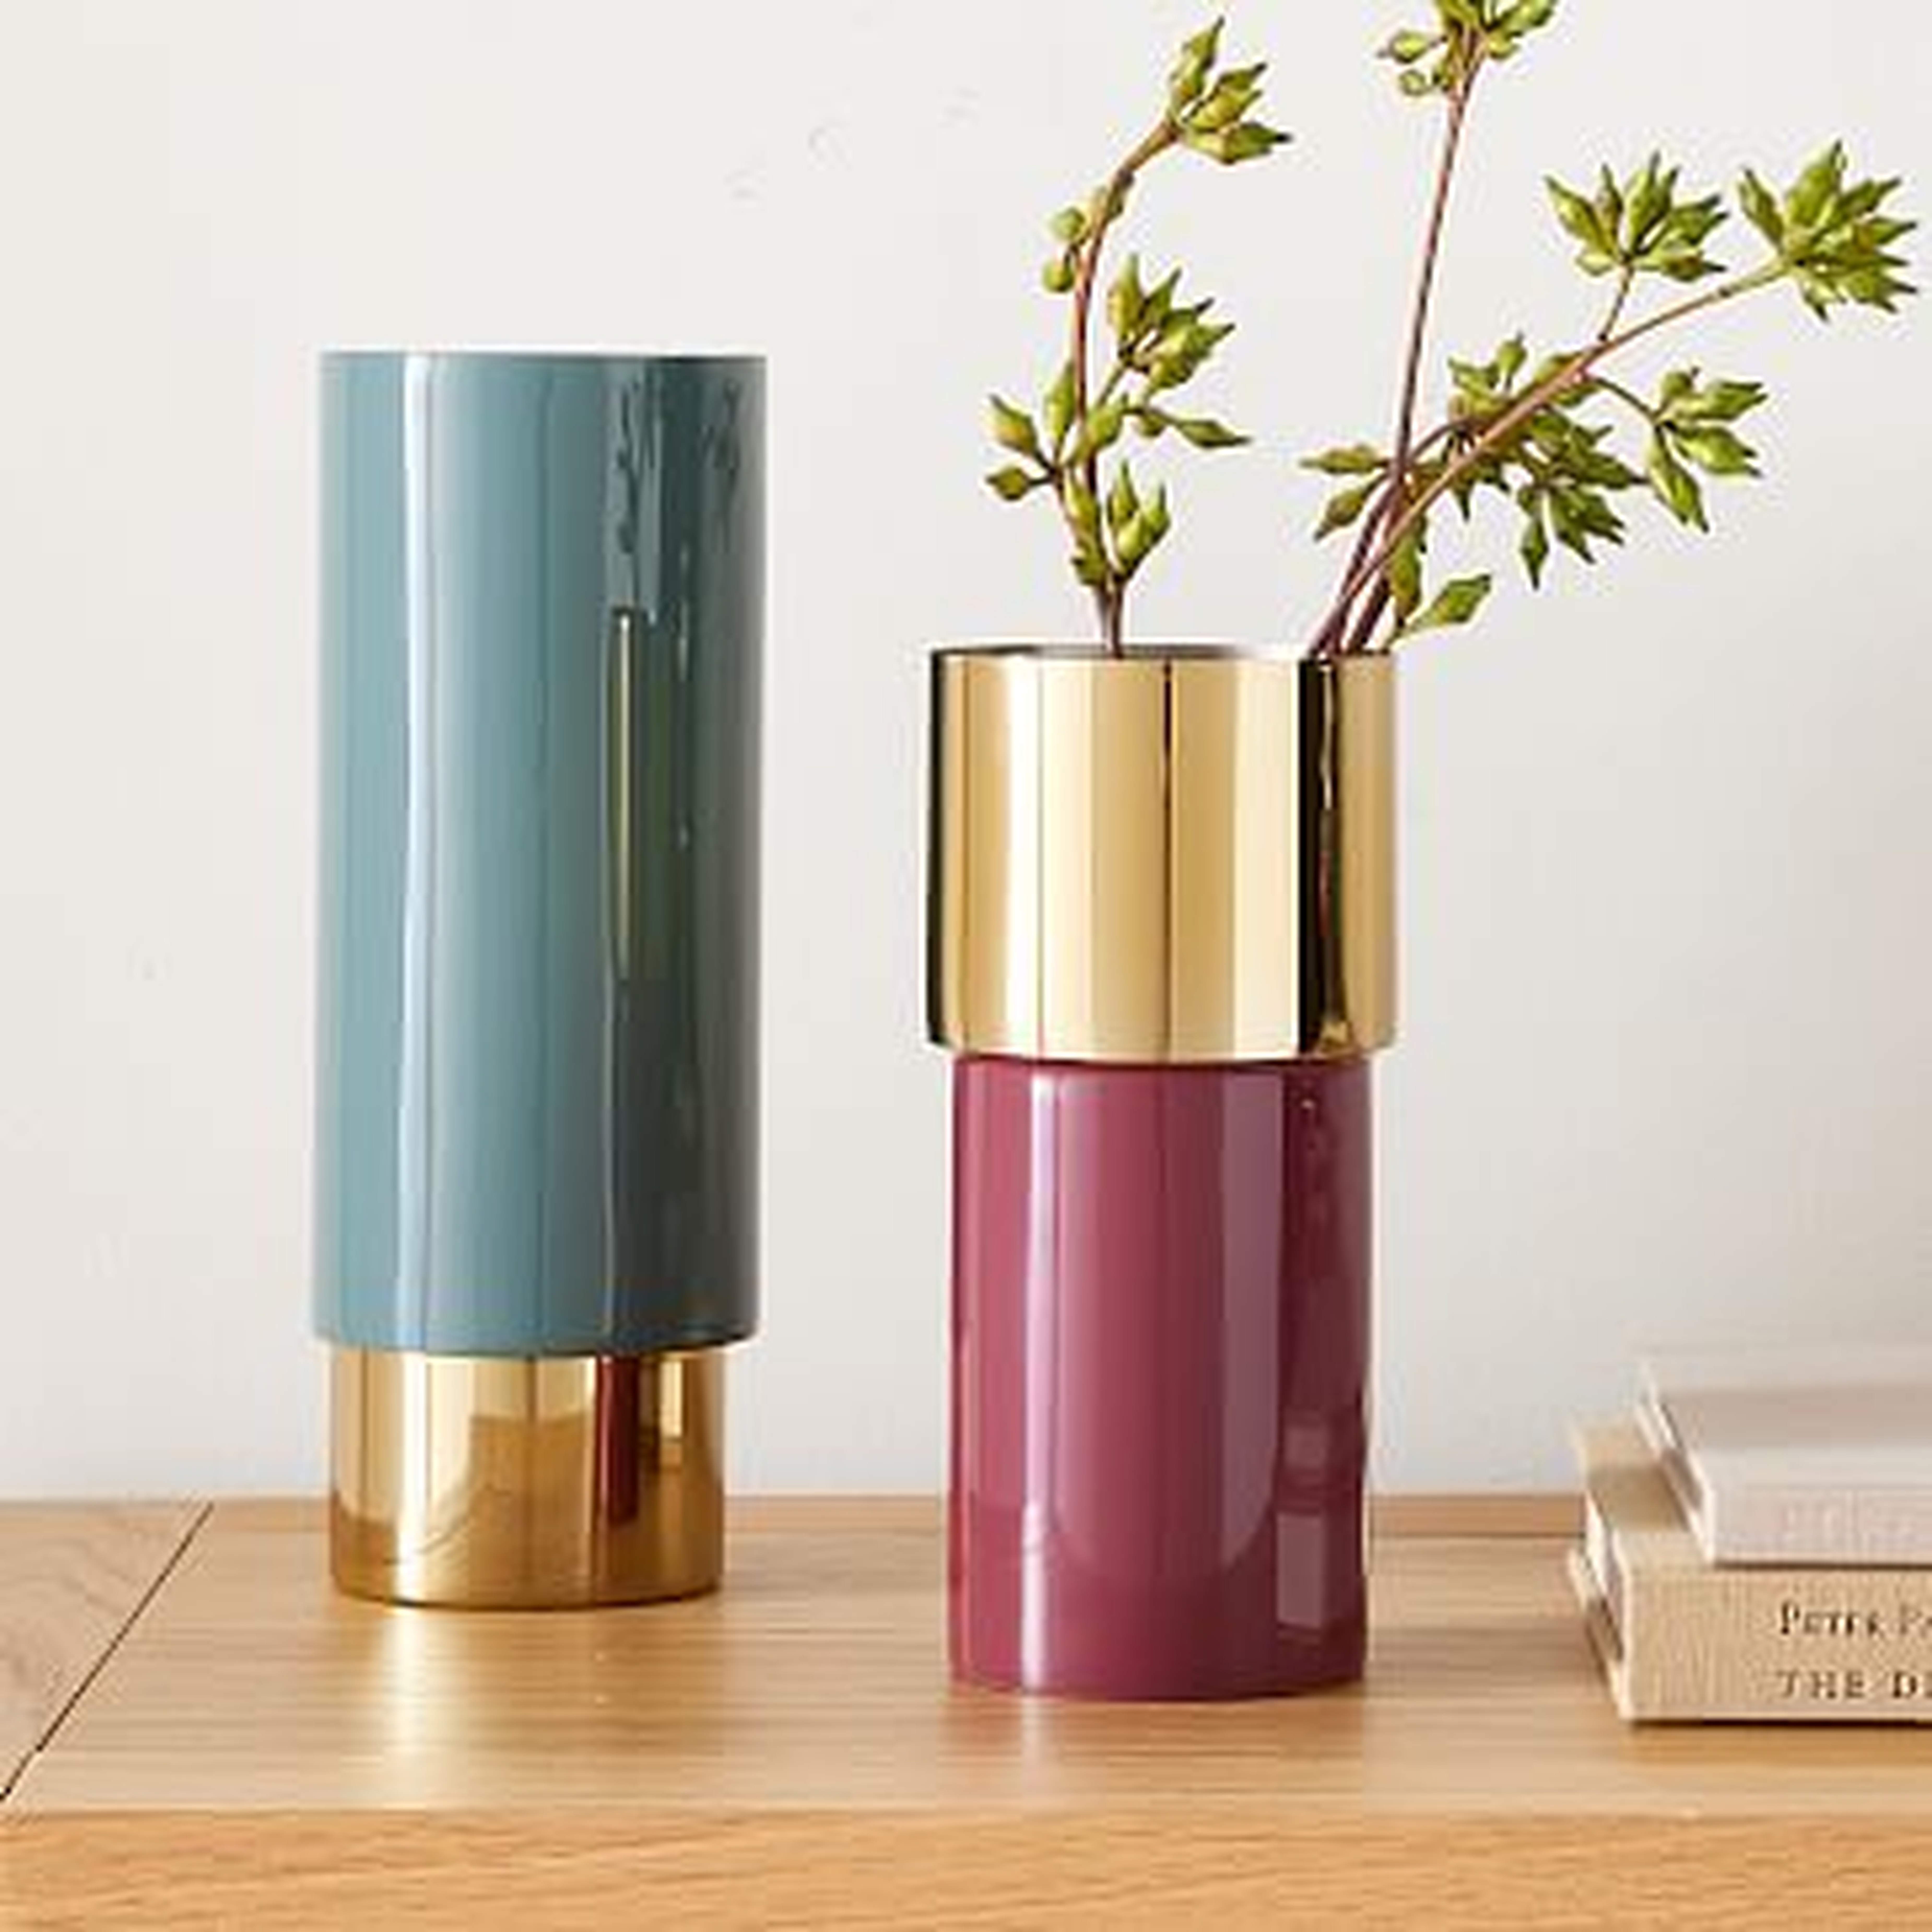 Brass And Enamel Tube Vase, Wine And Ocean, Medium And Large, Set of 2 - West Elm